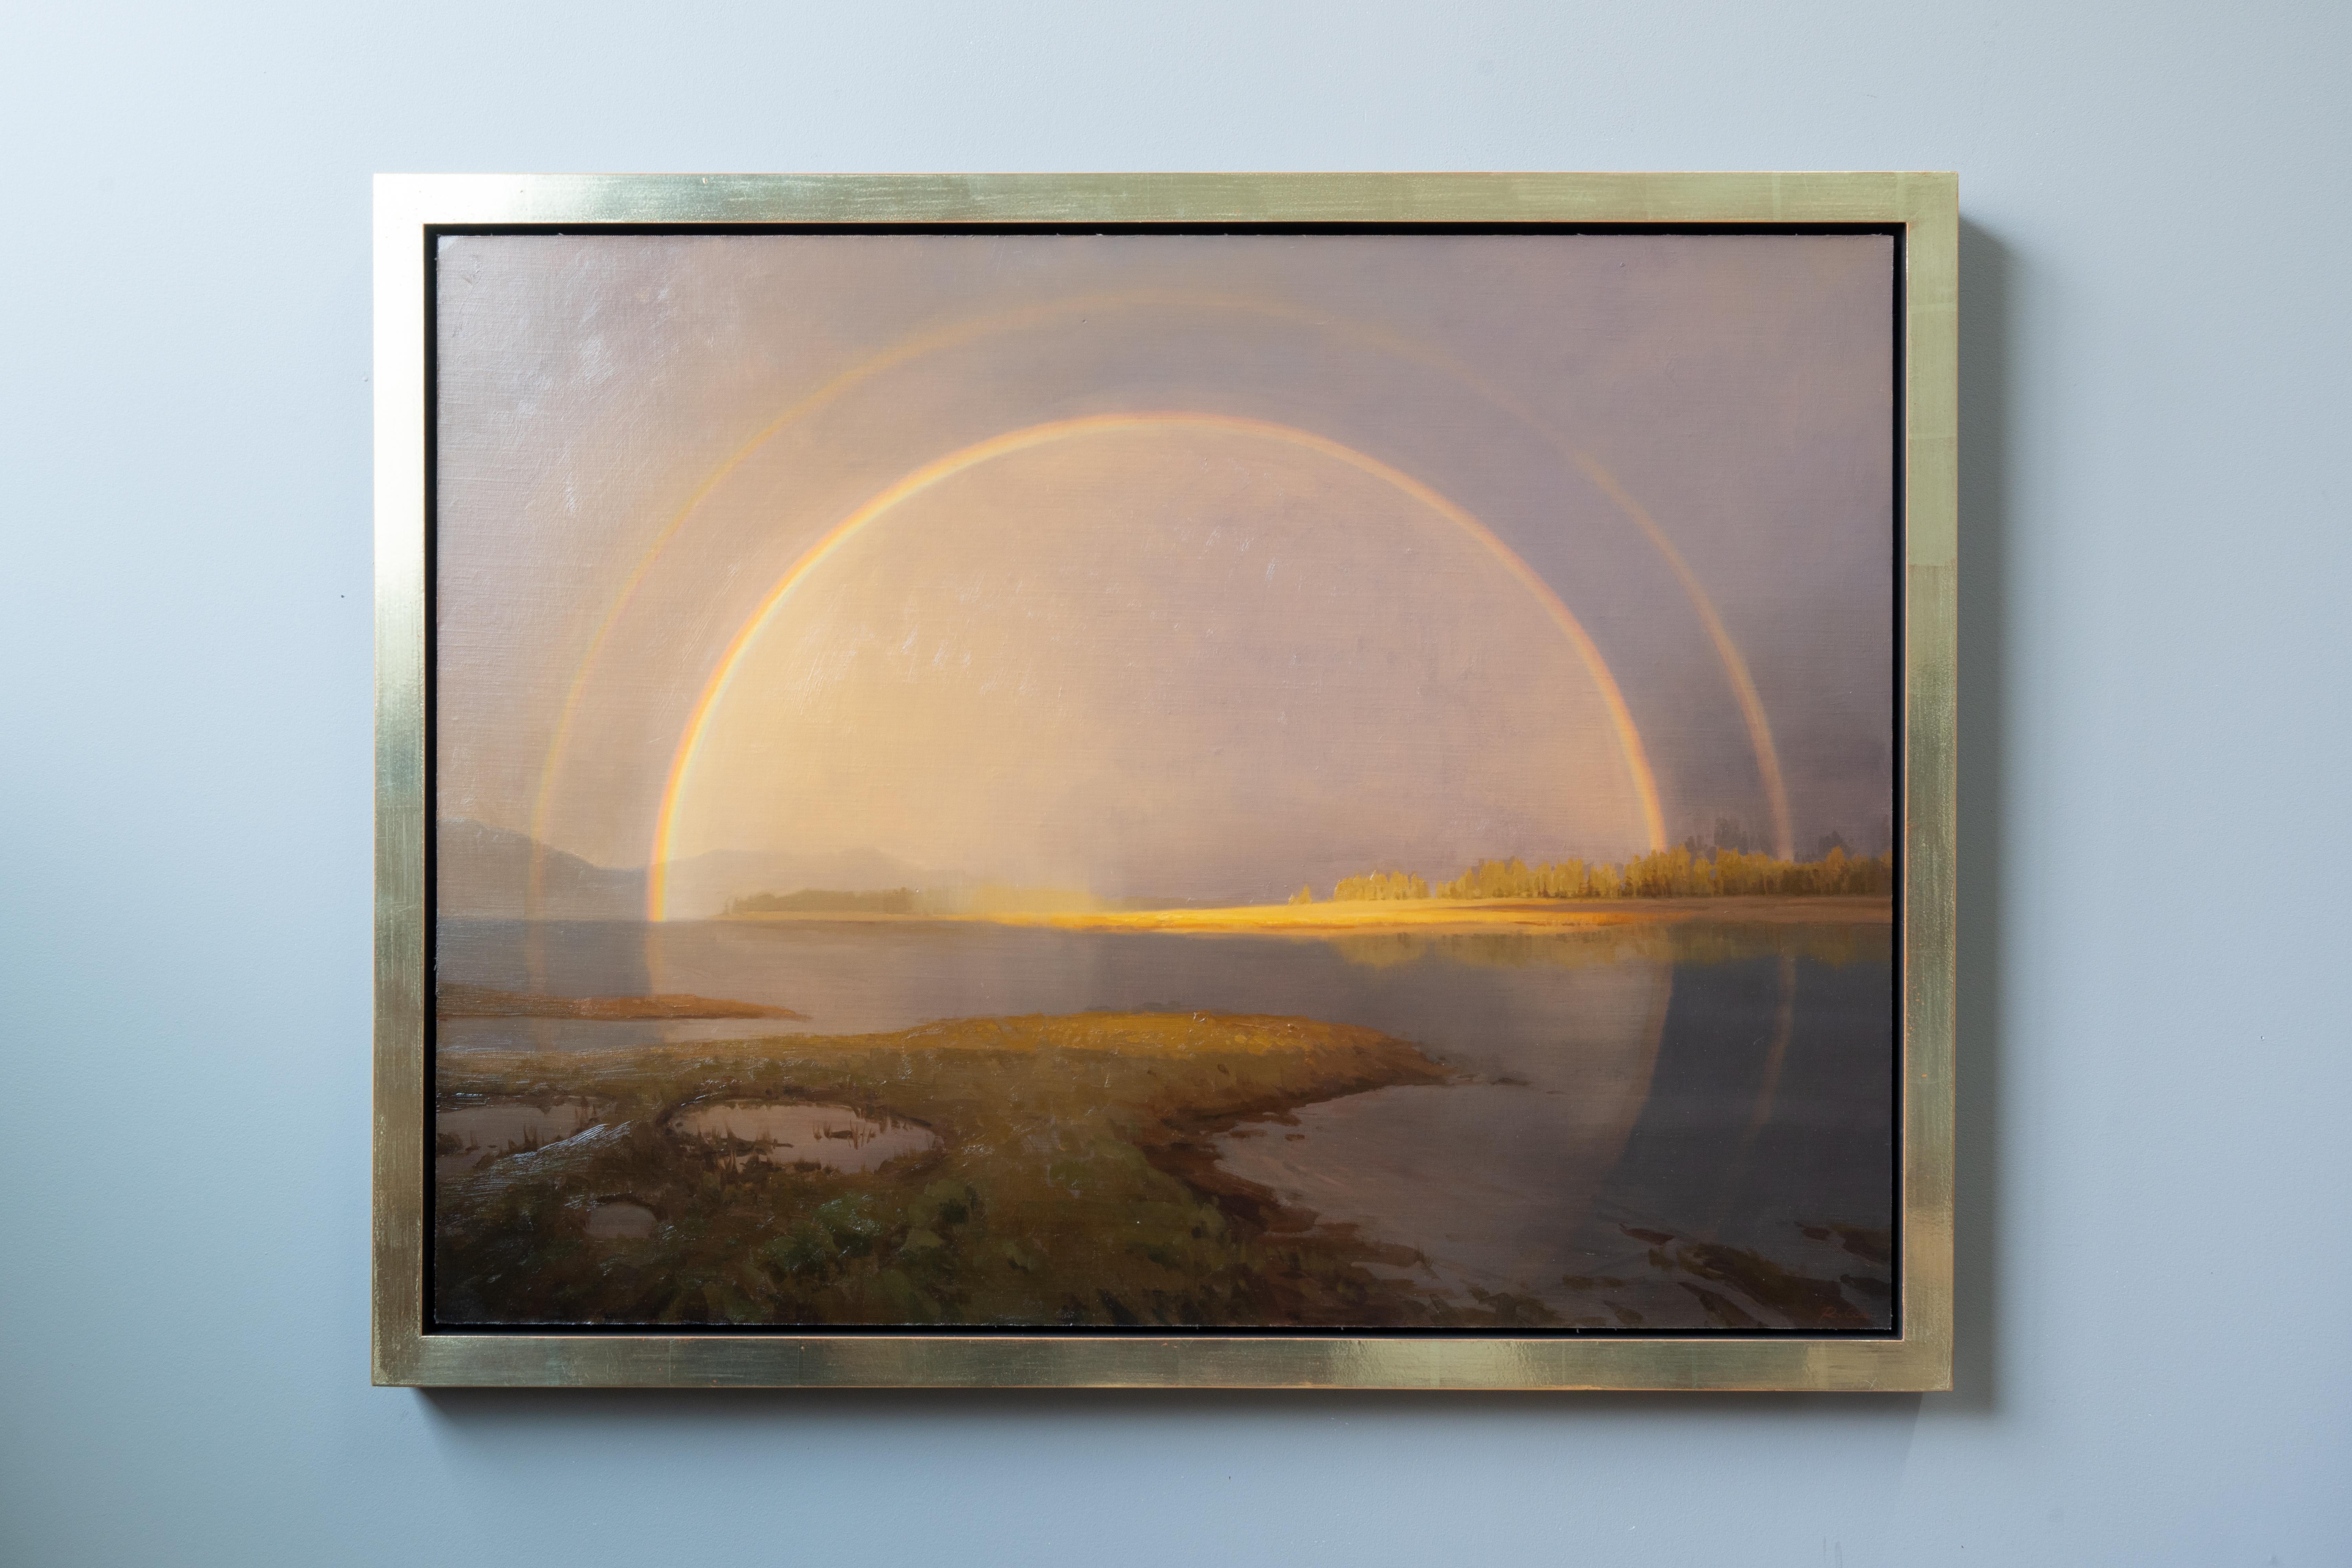 Robin Cole’s “Vantage Point” is a compelling 2024 oil on mounted linen piece that transports the viewer to a serene natural setting, enveloped by a captivating double rainbow. Measuring 27 x 36 inches, this original work is gracefully housed within